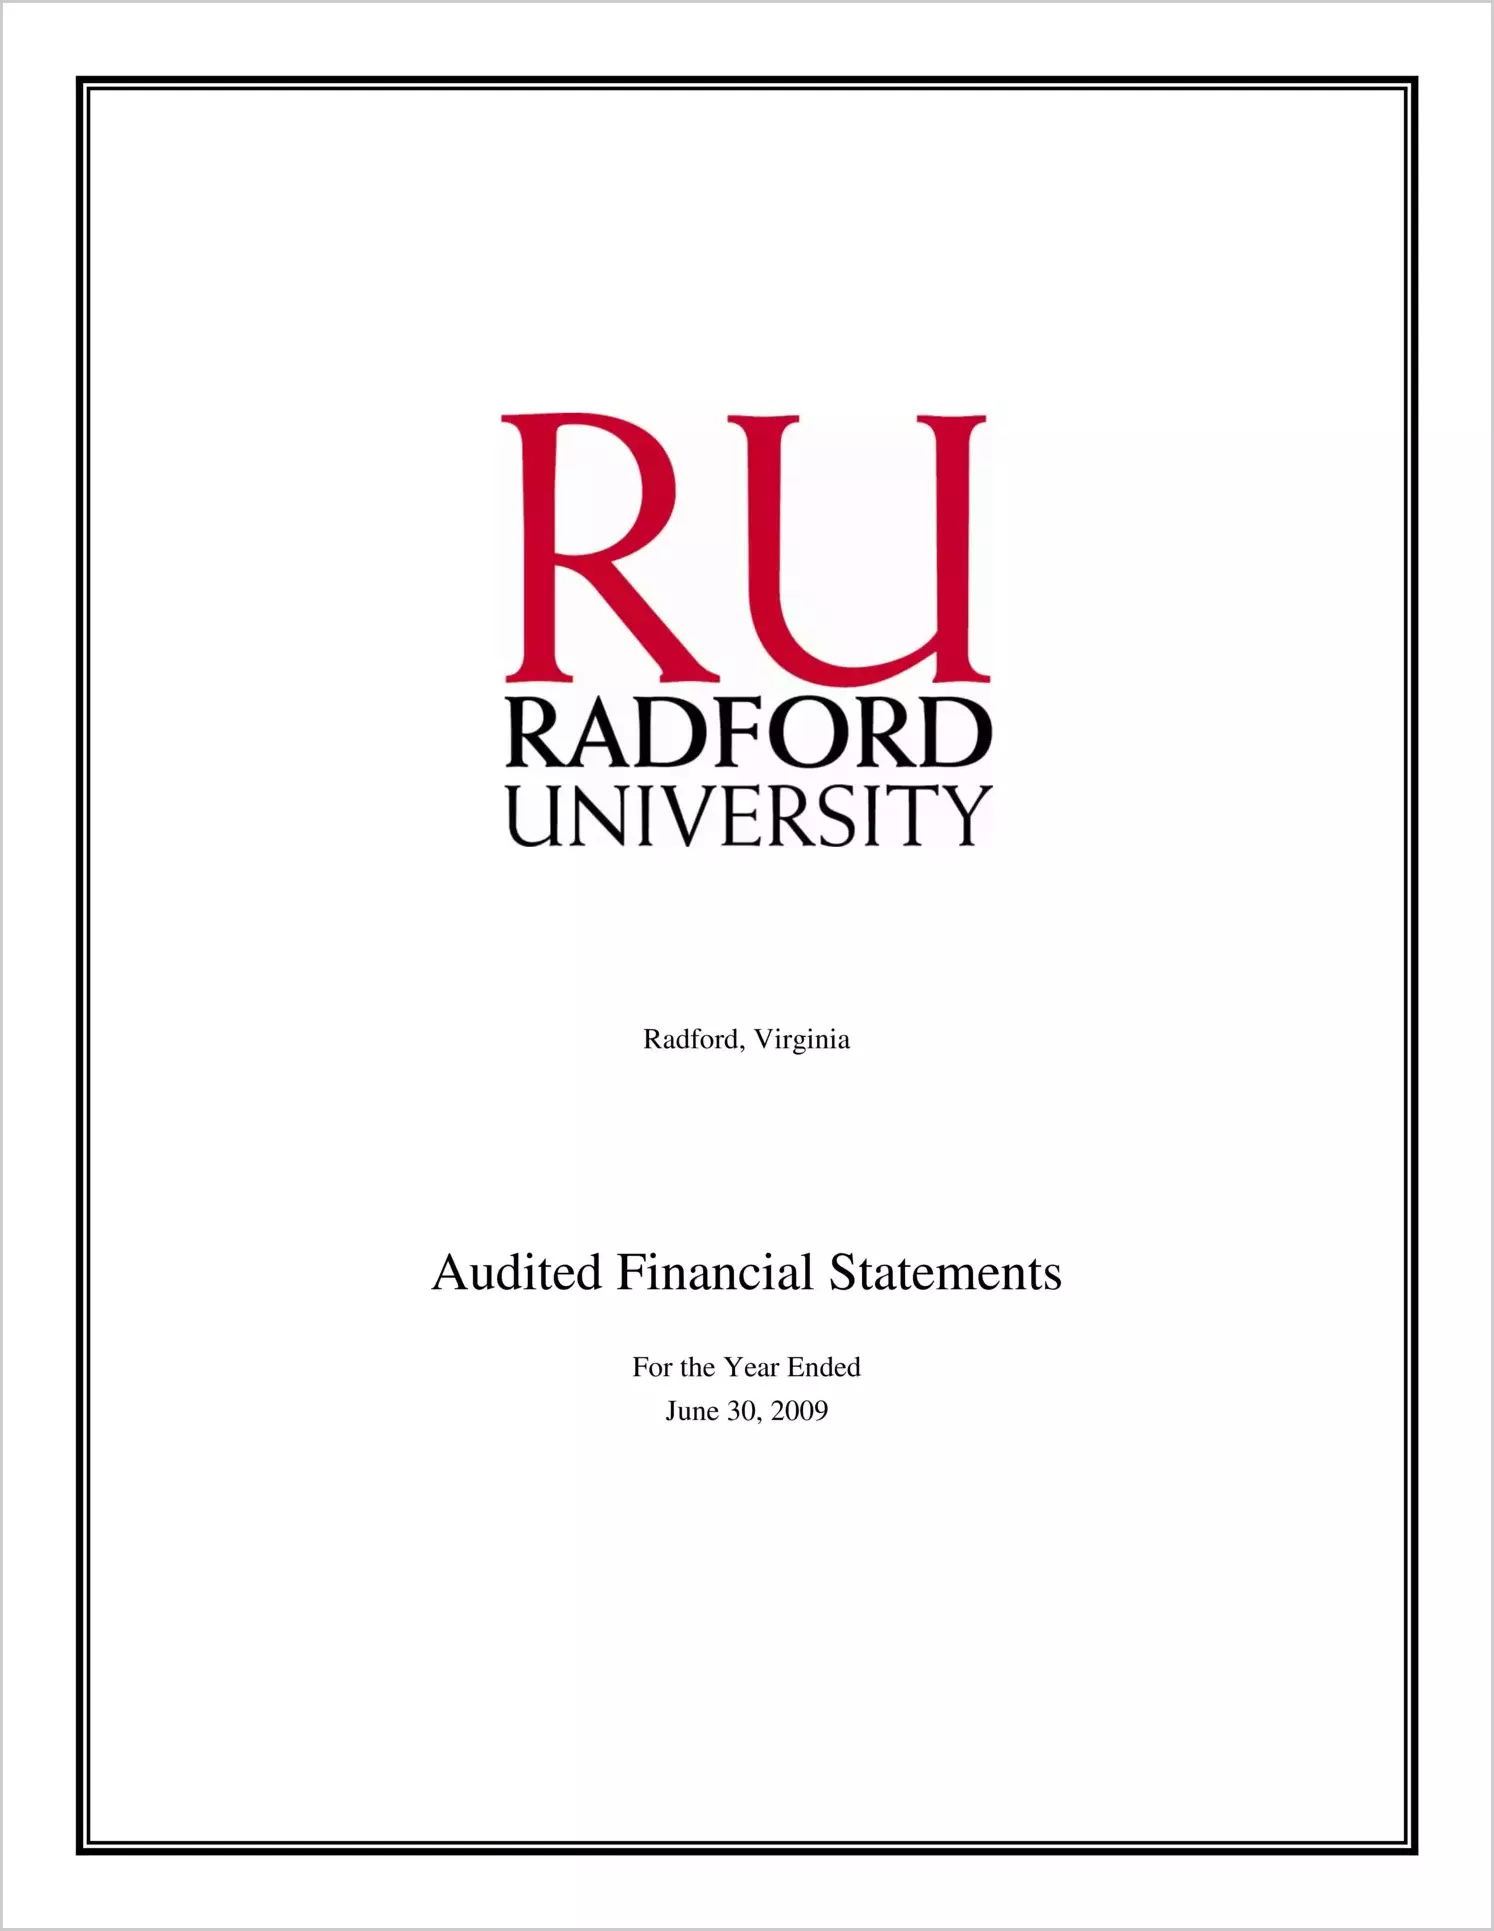 Financial Statements for Radford University year ended June 30, 2009